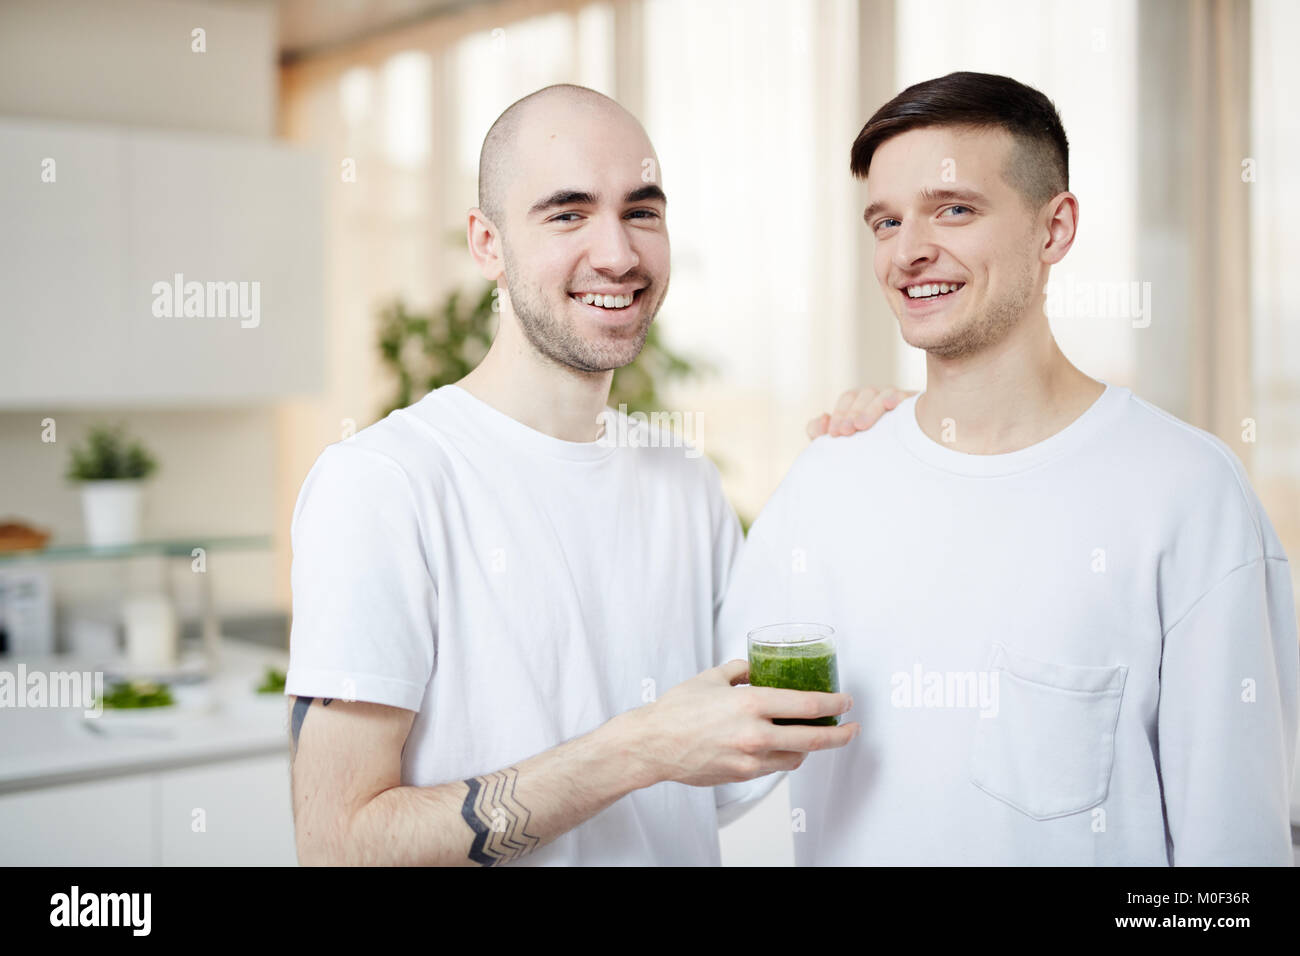 Men with vegetable cocktail Stock Photo